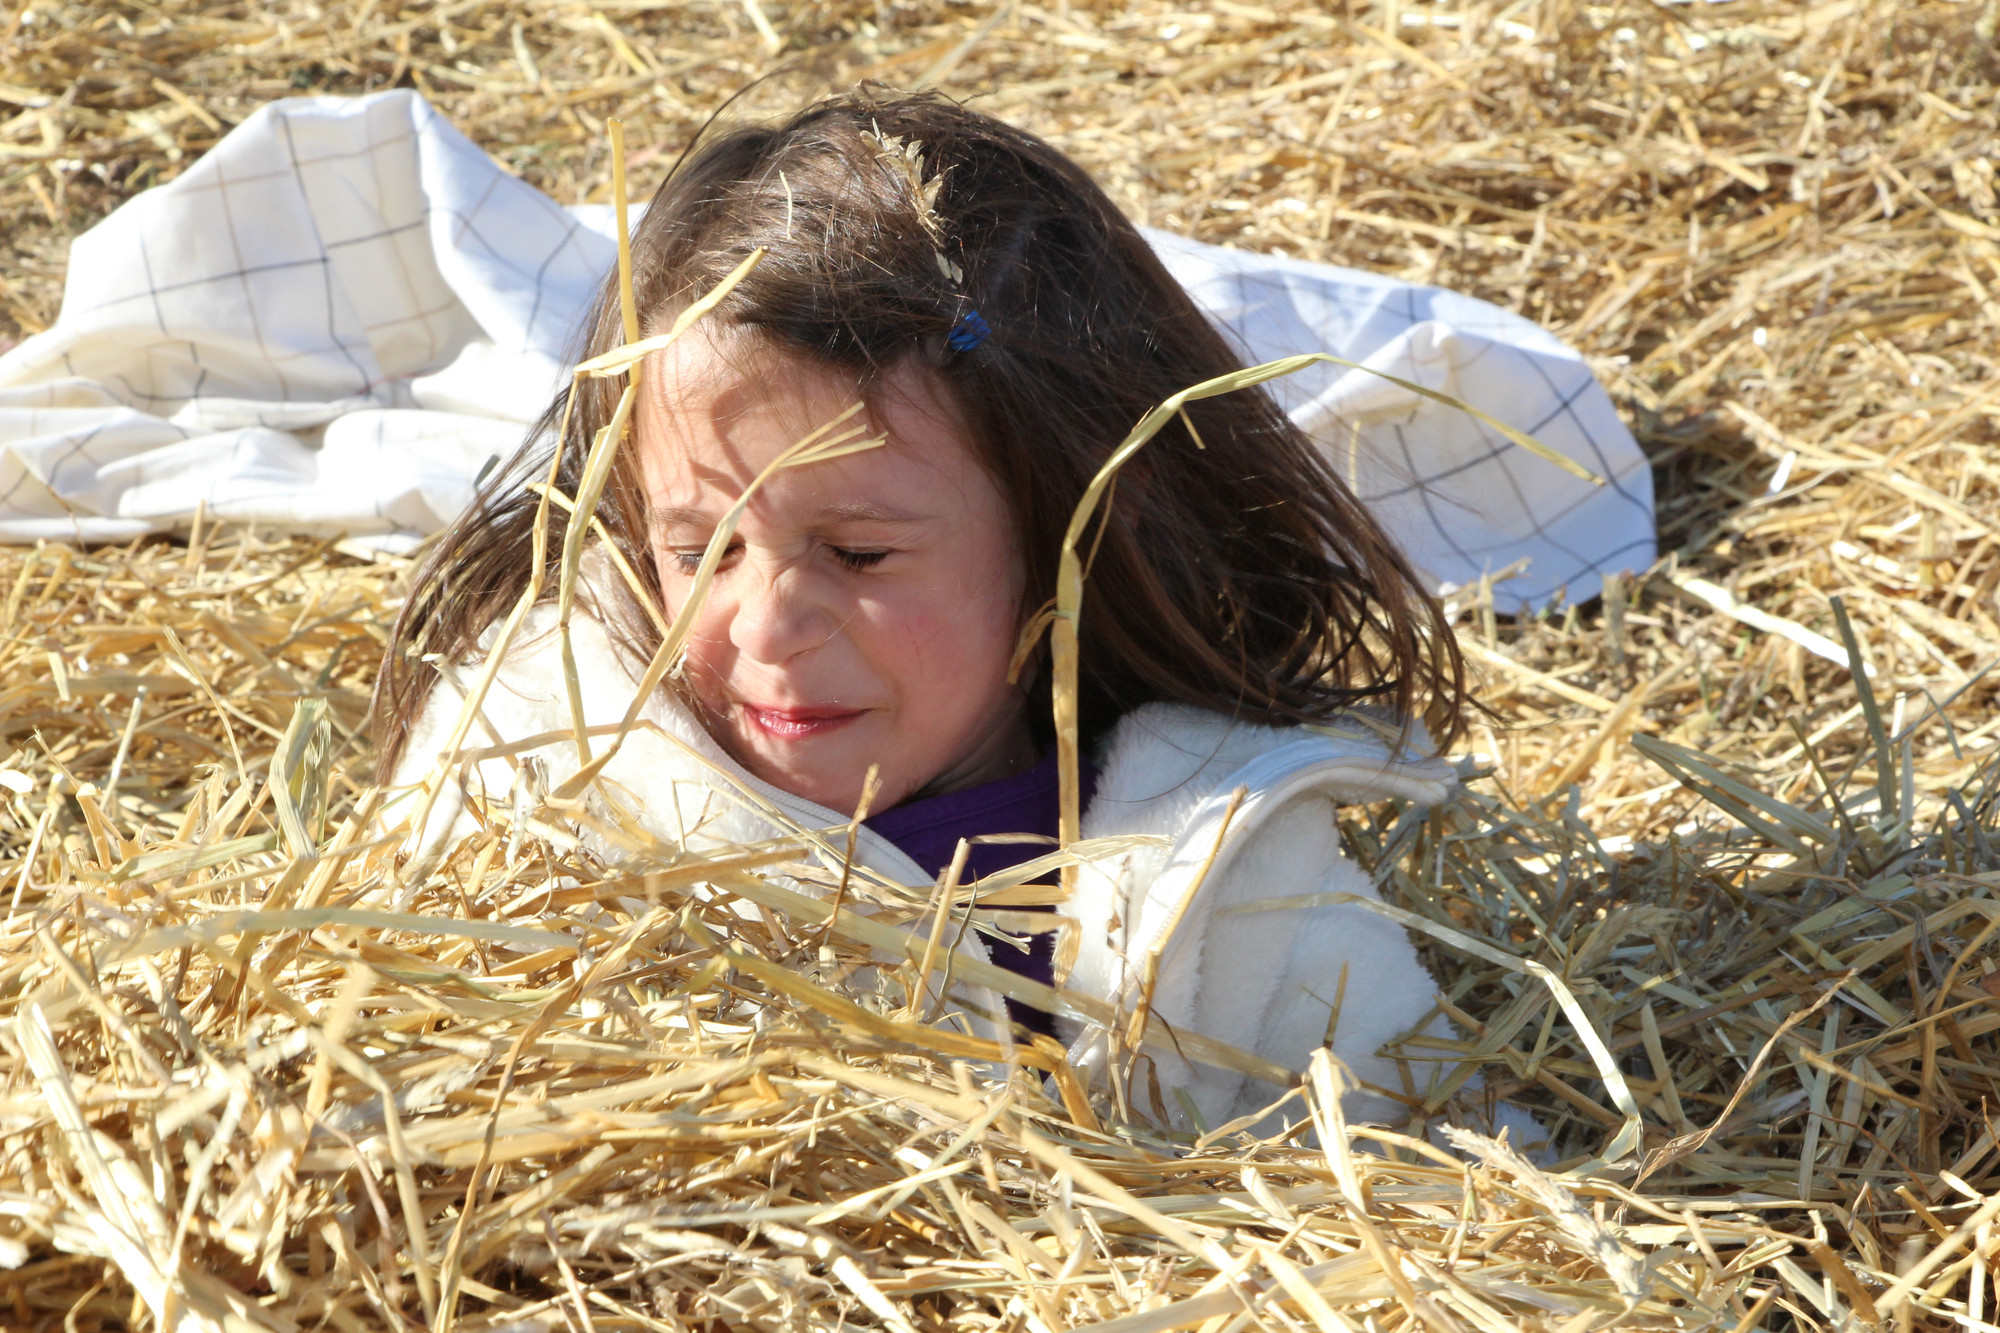 Maye Slate enjoyed playing in the hay at the Baldwin Halloween fest at Milburn Park.